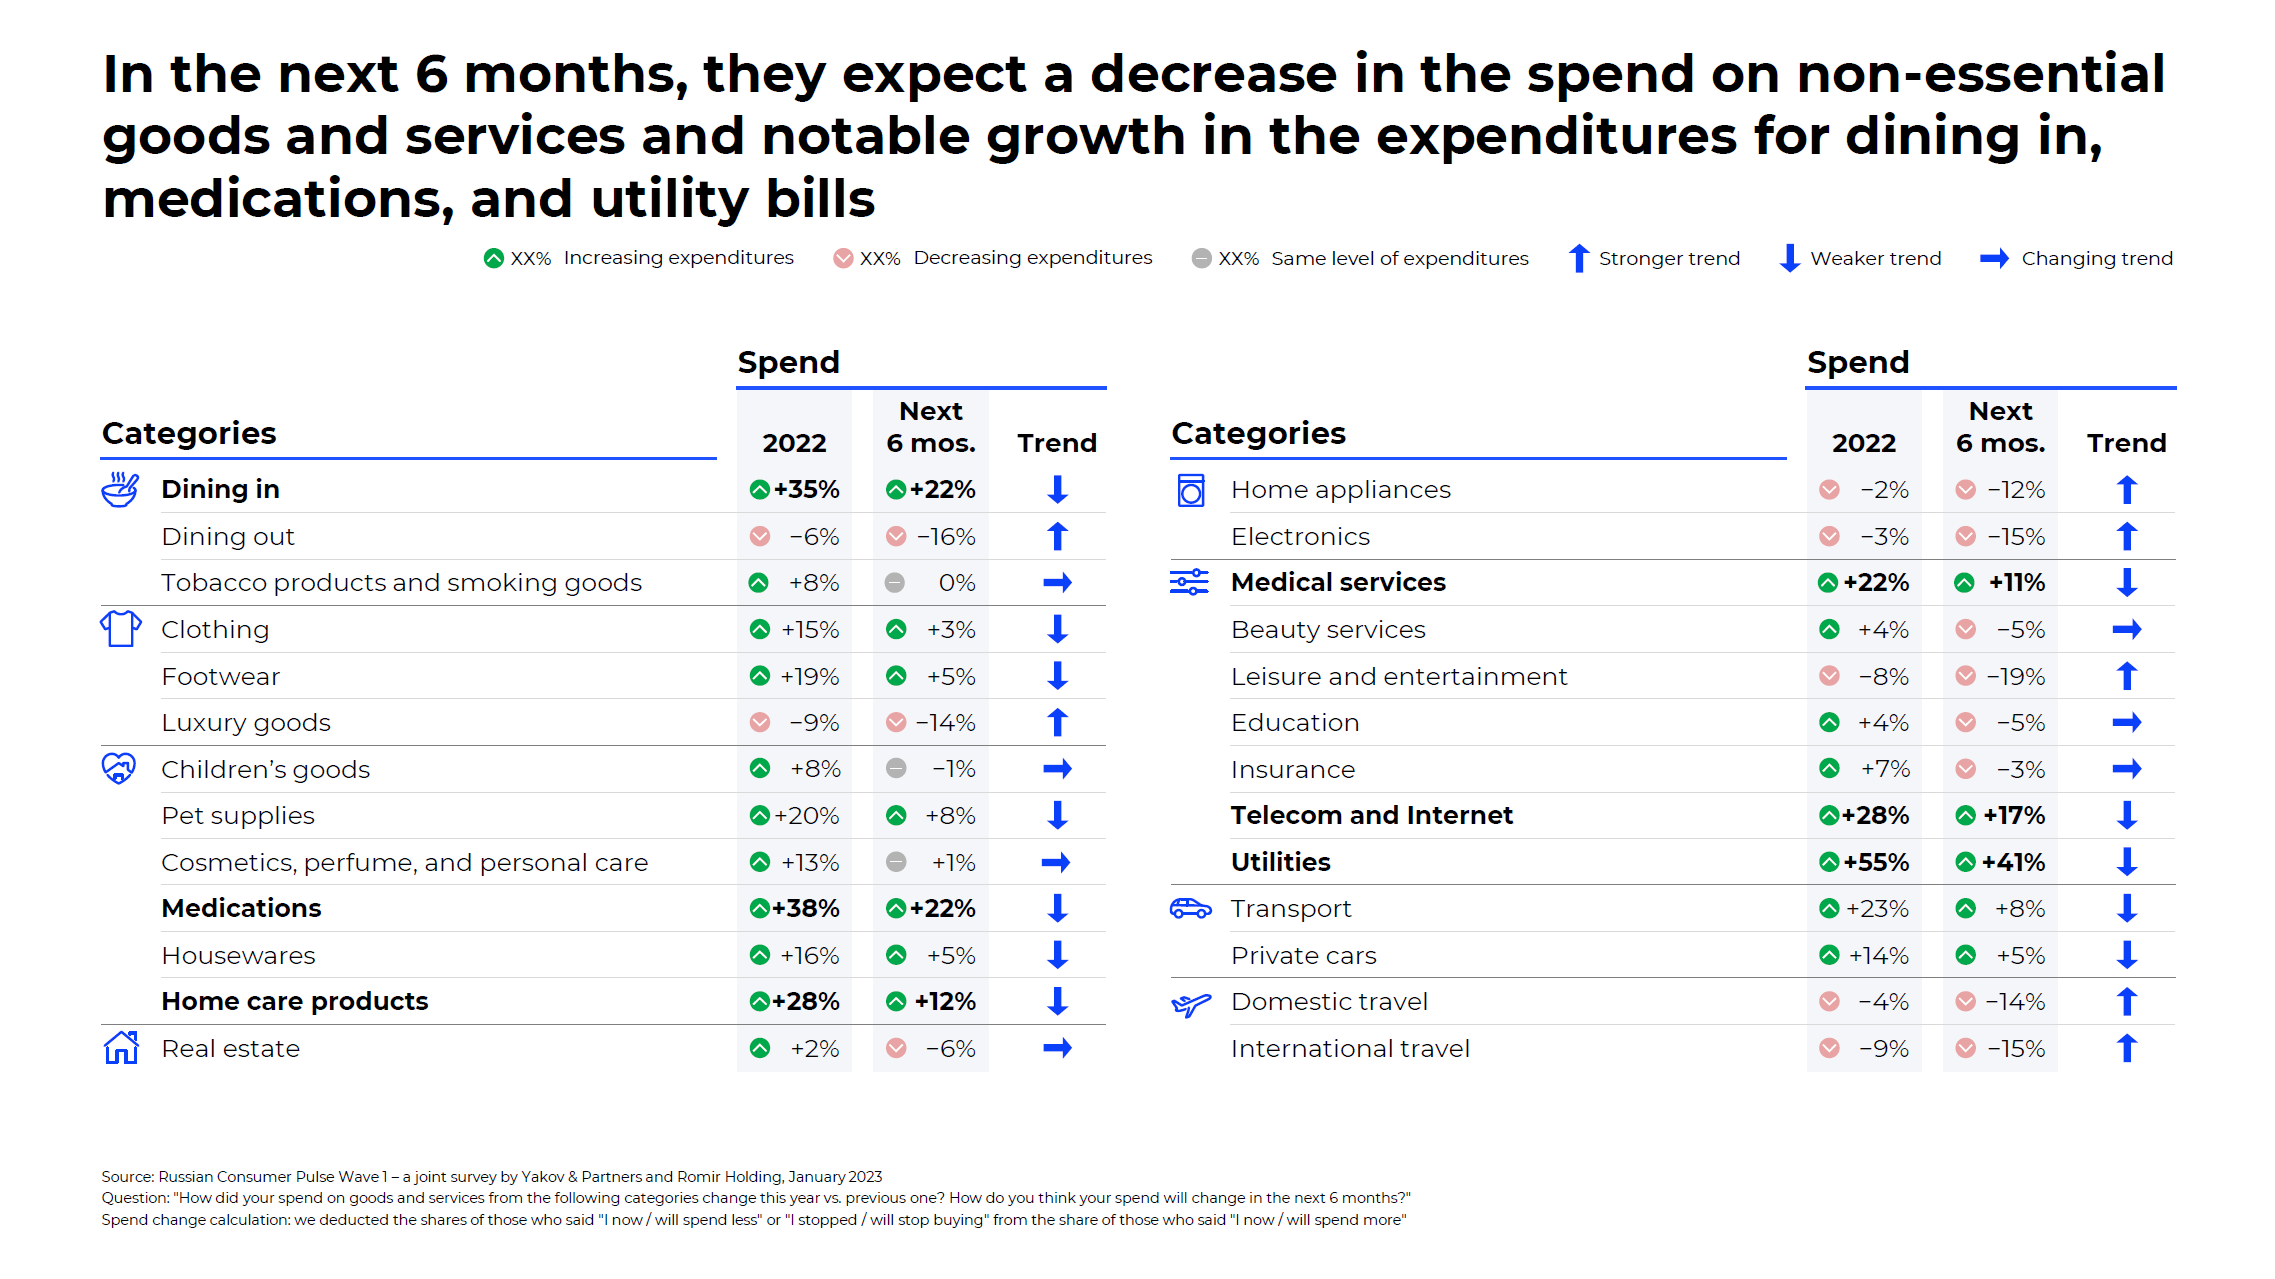 In the next 6 months, they expect a decrease in the spend on non-essential goods and services and notable growth in the expenditures for dining in, medications and utility bills